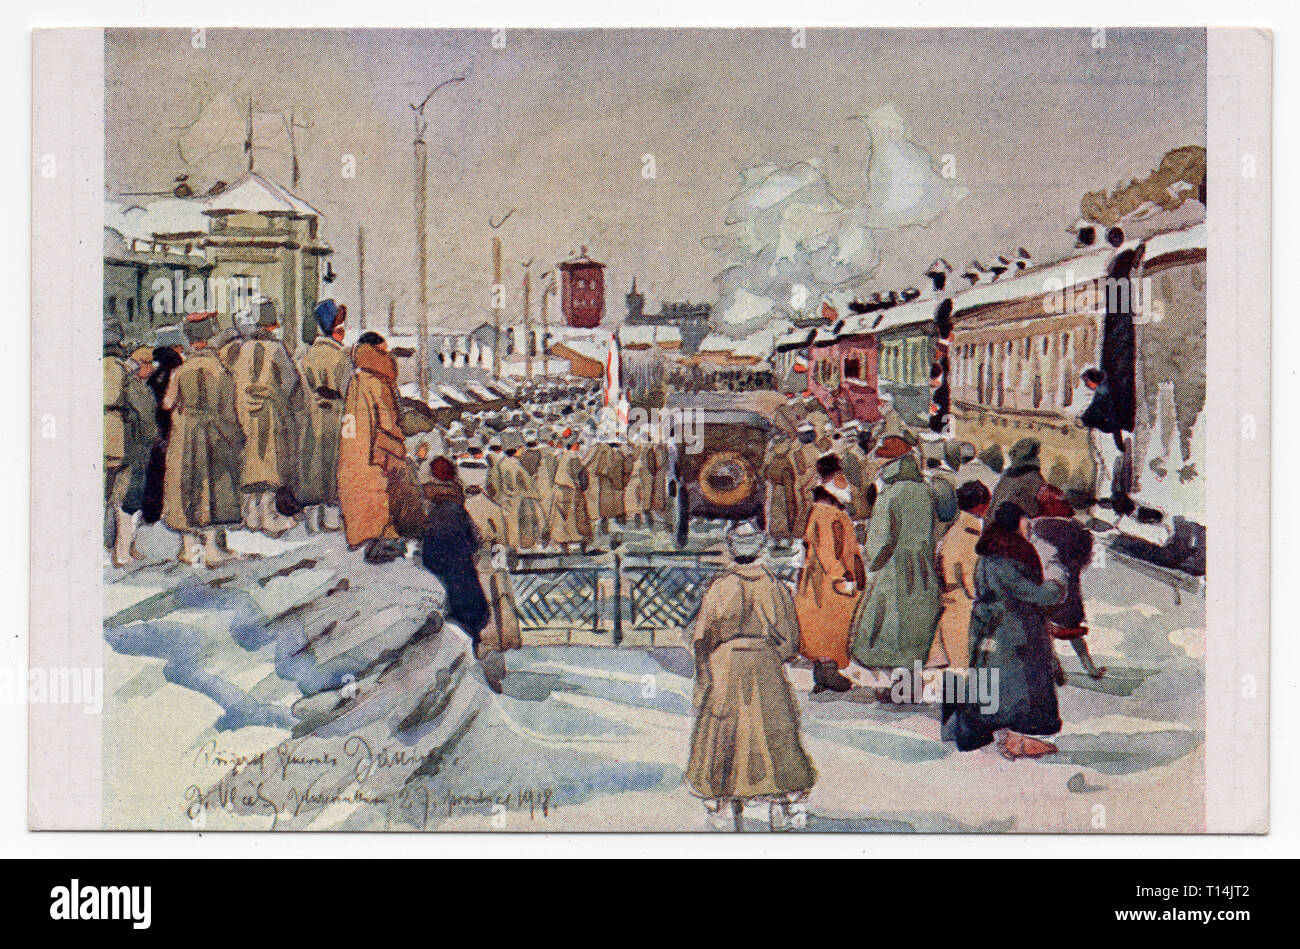 Arriving of French general Maurice Janin to Yekaterinburg, Russia, depicted in the watercolour painting by Czech artist Jindřich Vlček painted on 27 December 1918 and printed on the Czechoslovak vintage postcard from the series 'Pictures from the life and fights of the Czechoslovak legions in Russia' ('Pohledy ze života a bojů československých legií v Rusku') issued in Czechoslovakia in the 1920s. General Maurice Janin was the chief of the French military mission in Siberia and the formal commander of the Czechoslovak legions during the Russian Civil War. Courtesy of the Azoor Postcard Collect Stock Photo